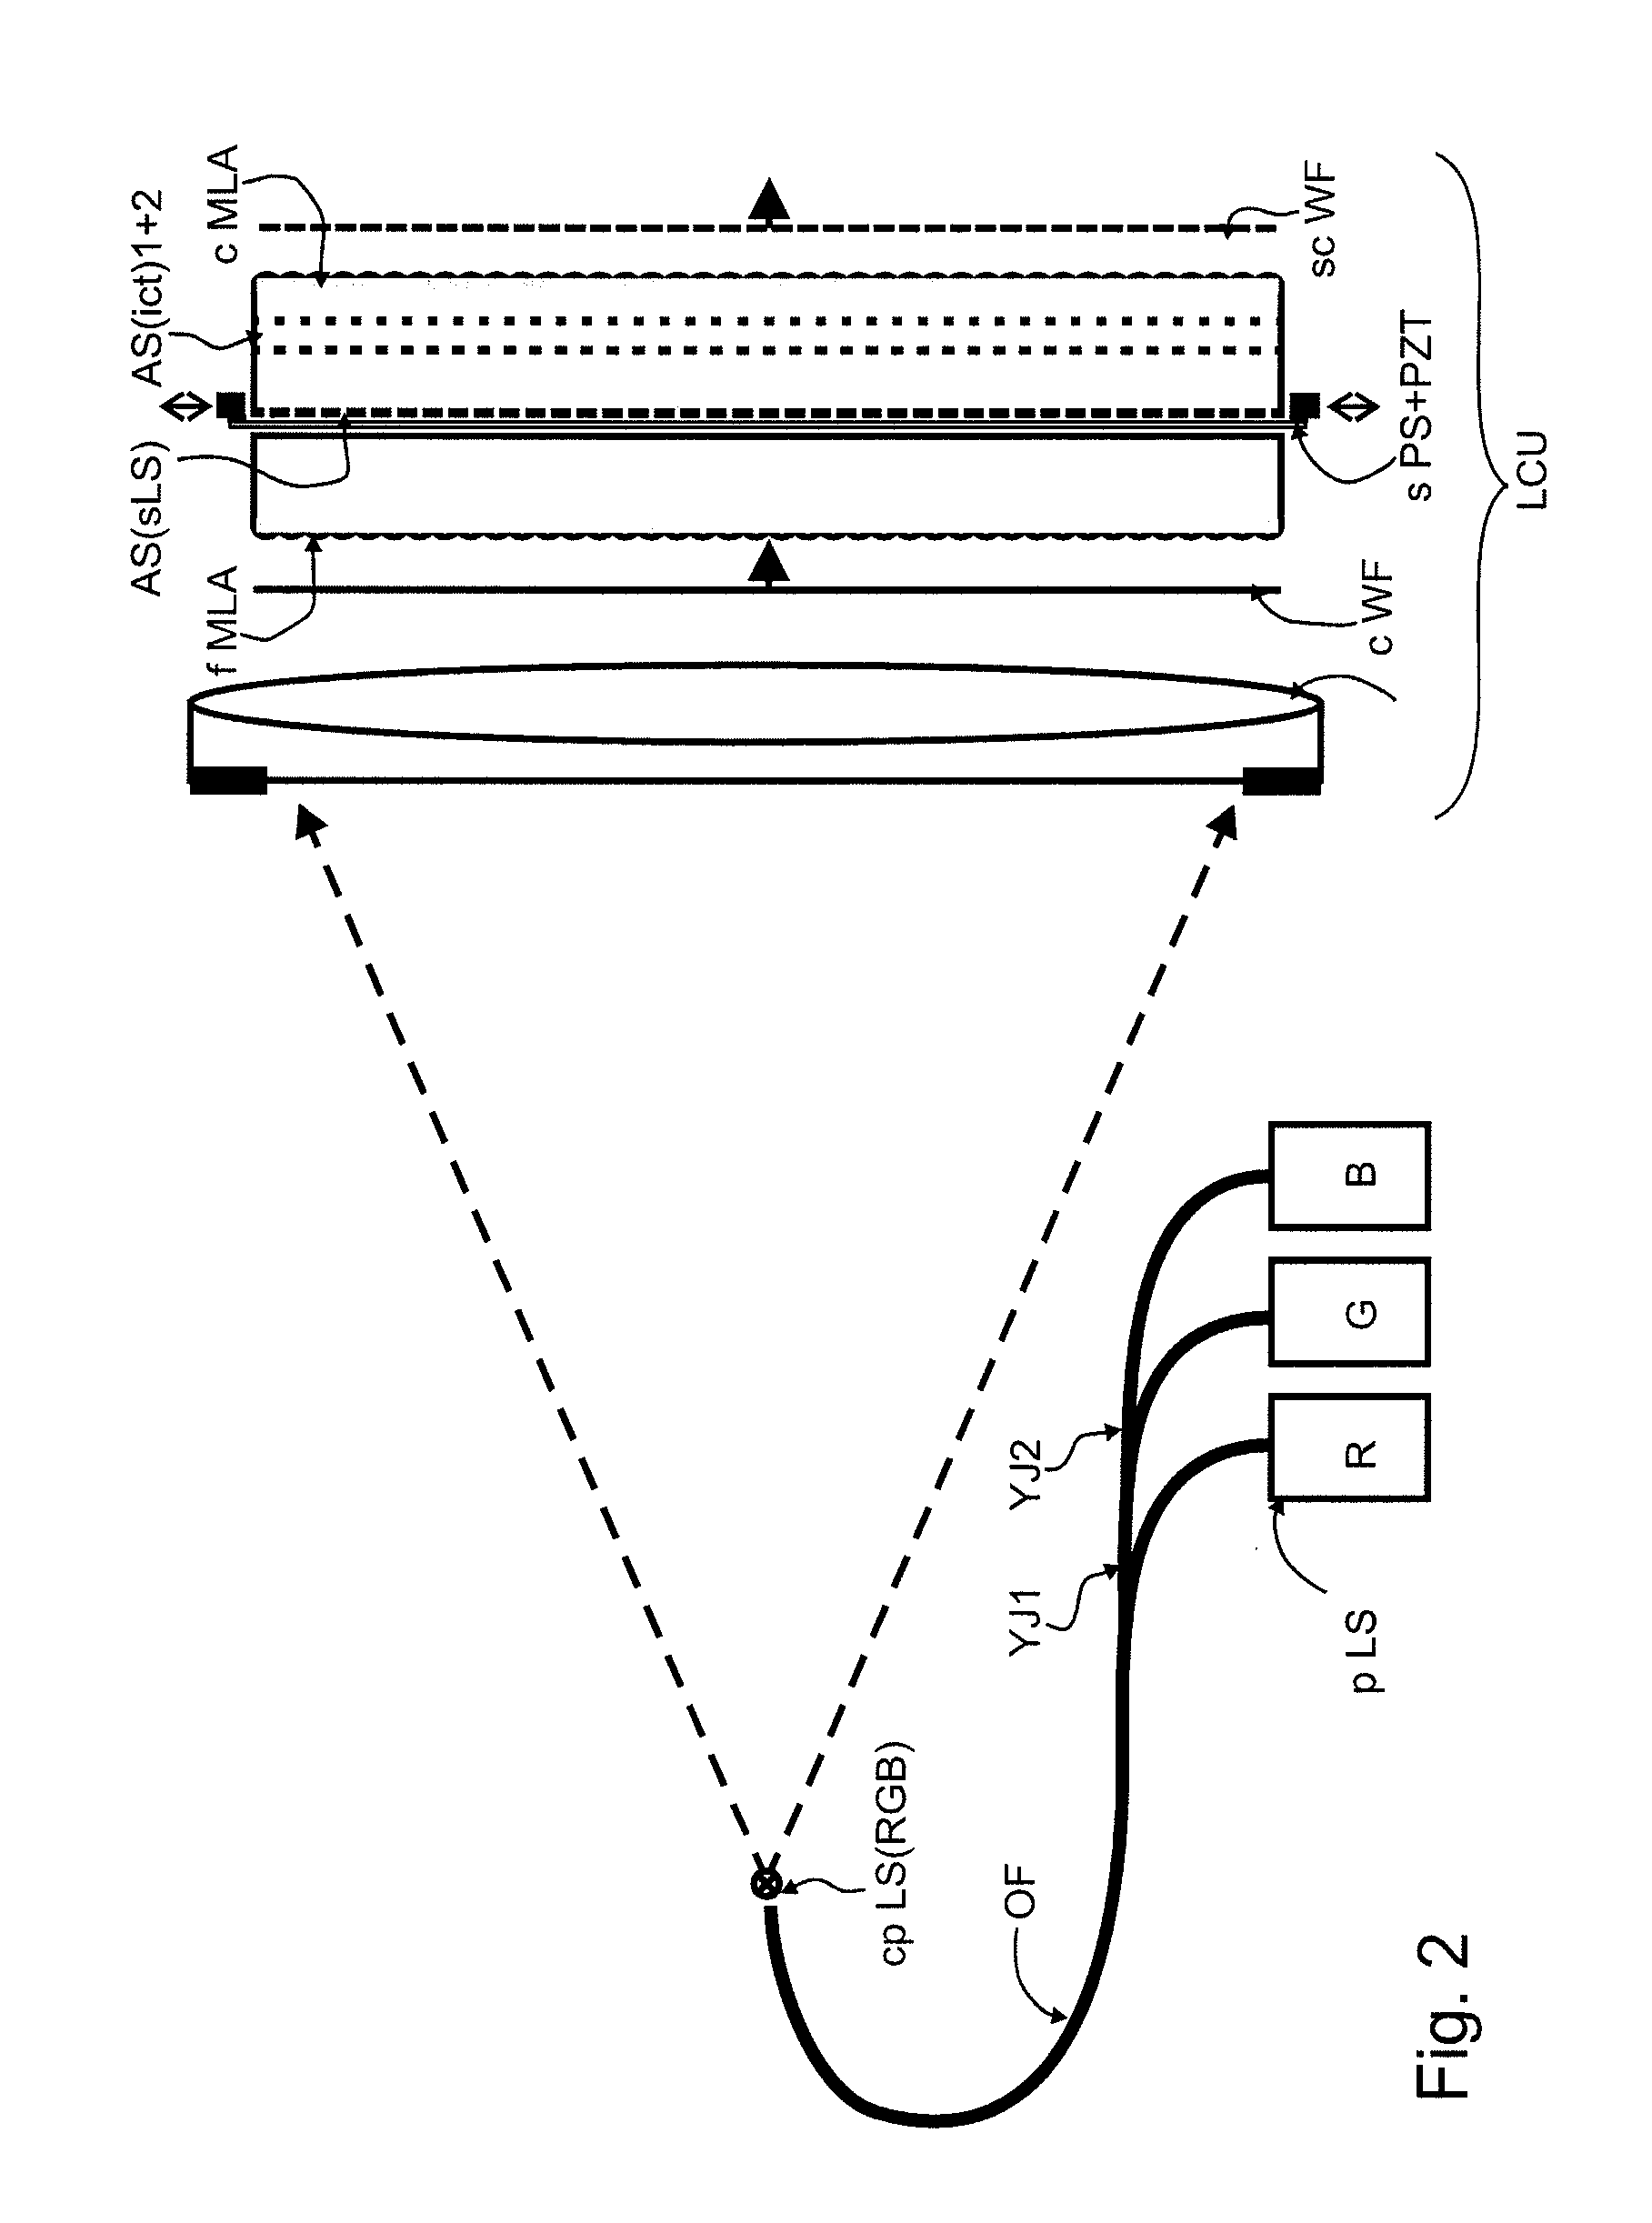 Beam divergence and various collimators for holographic or stereoscopic displays